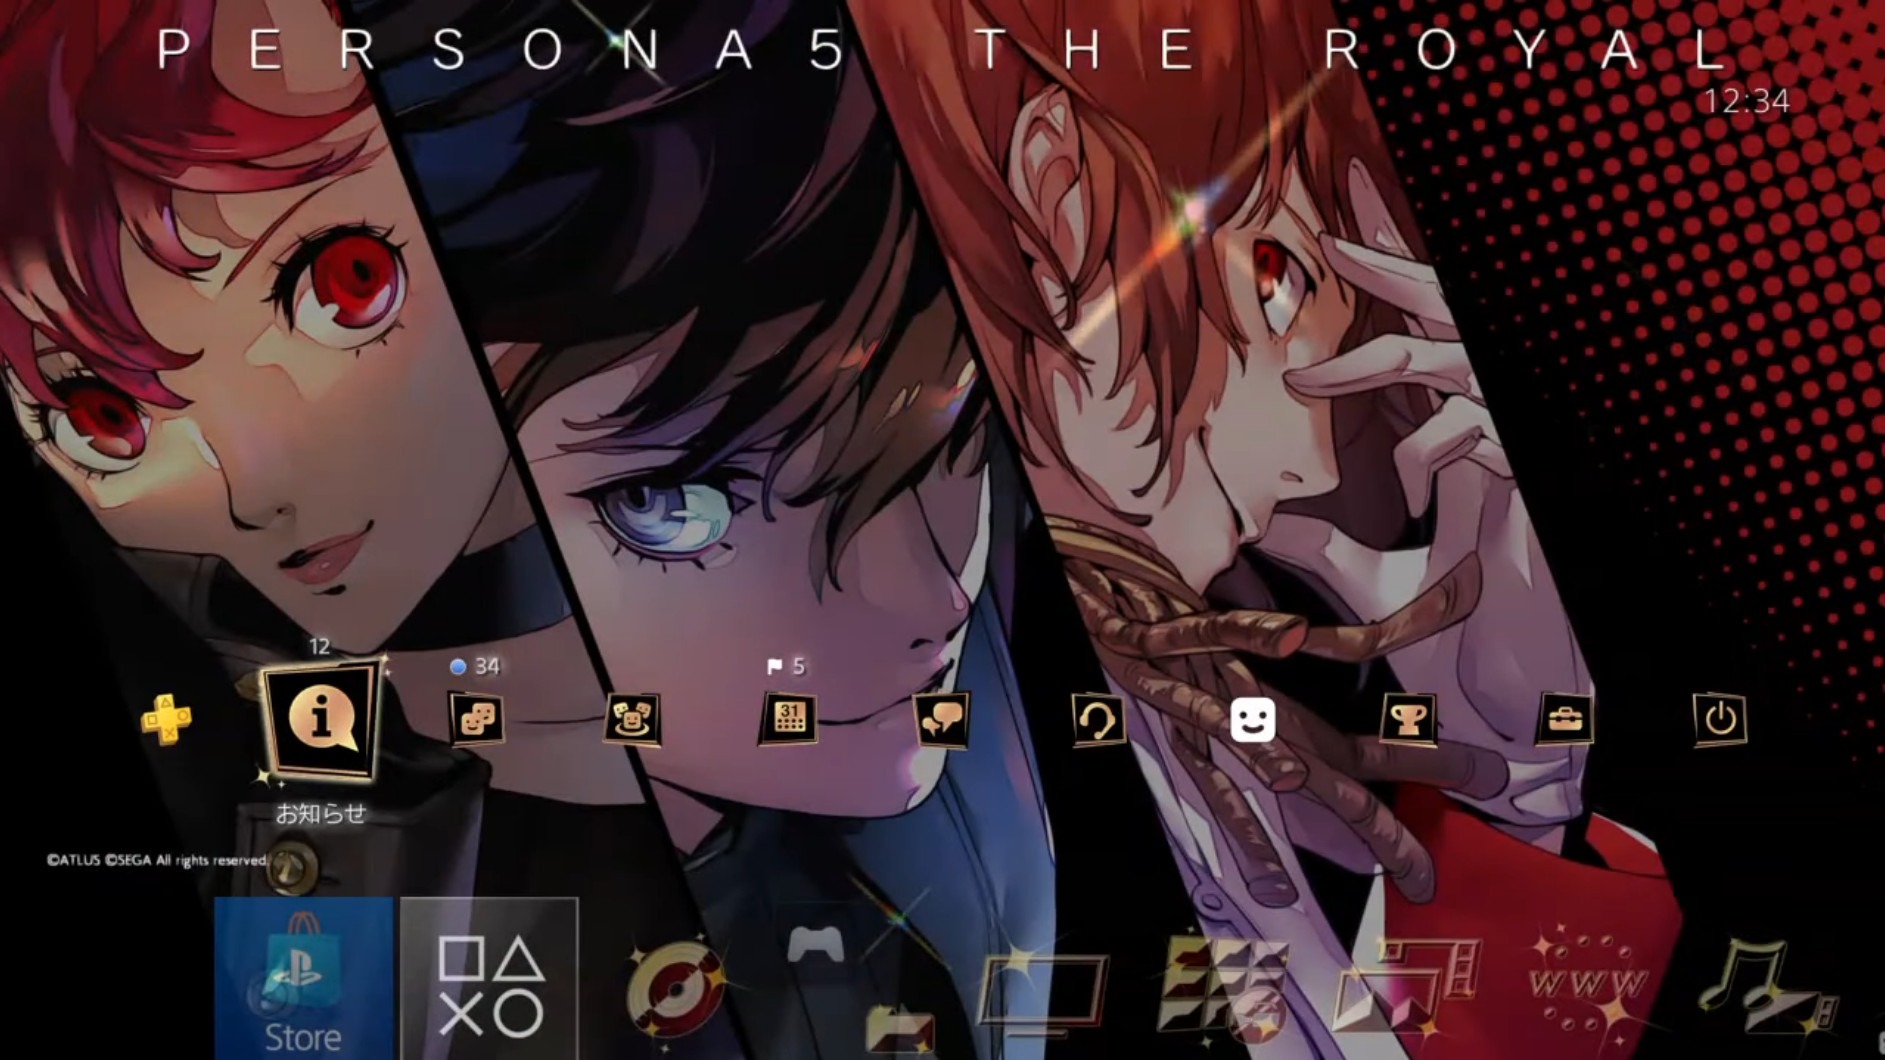 Sony Sending Out Even More Persona 5 Royal Dynamic PS4 Themes and Avatars   Push Square